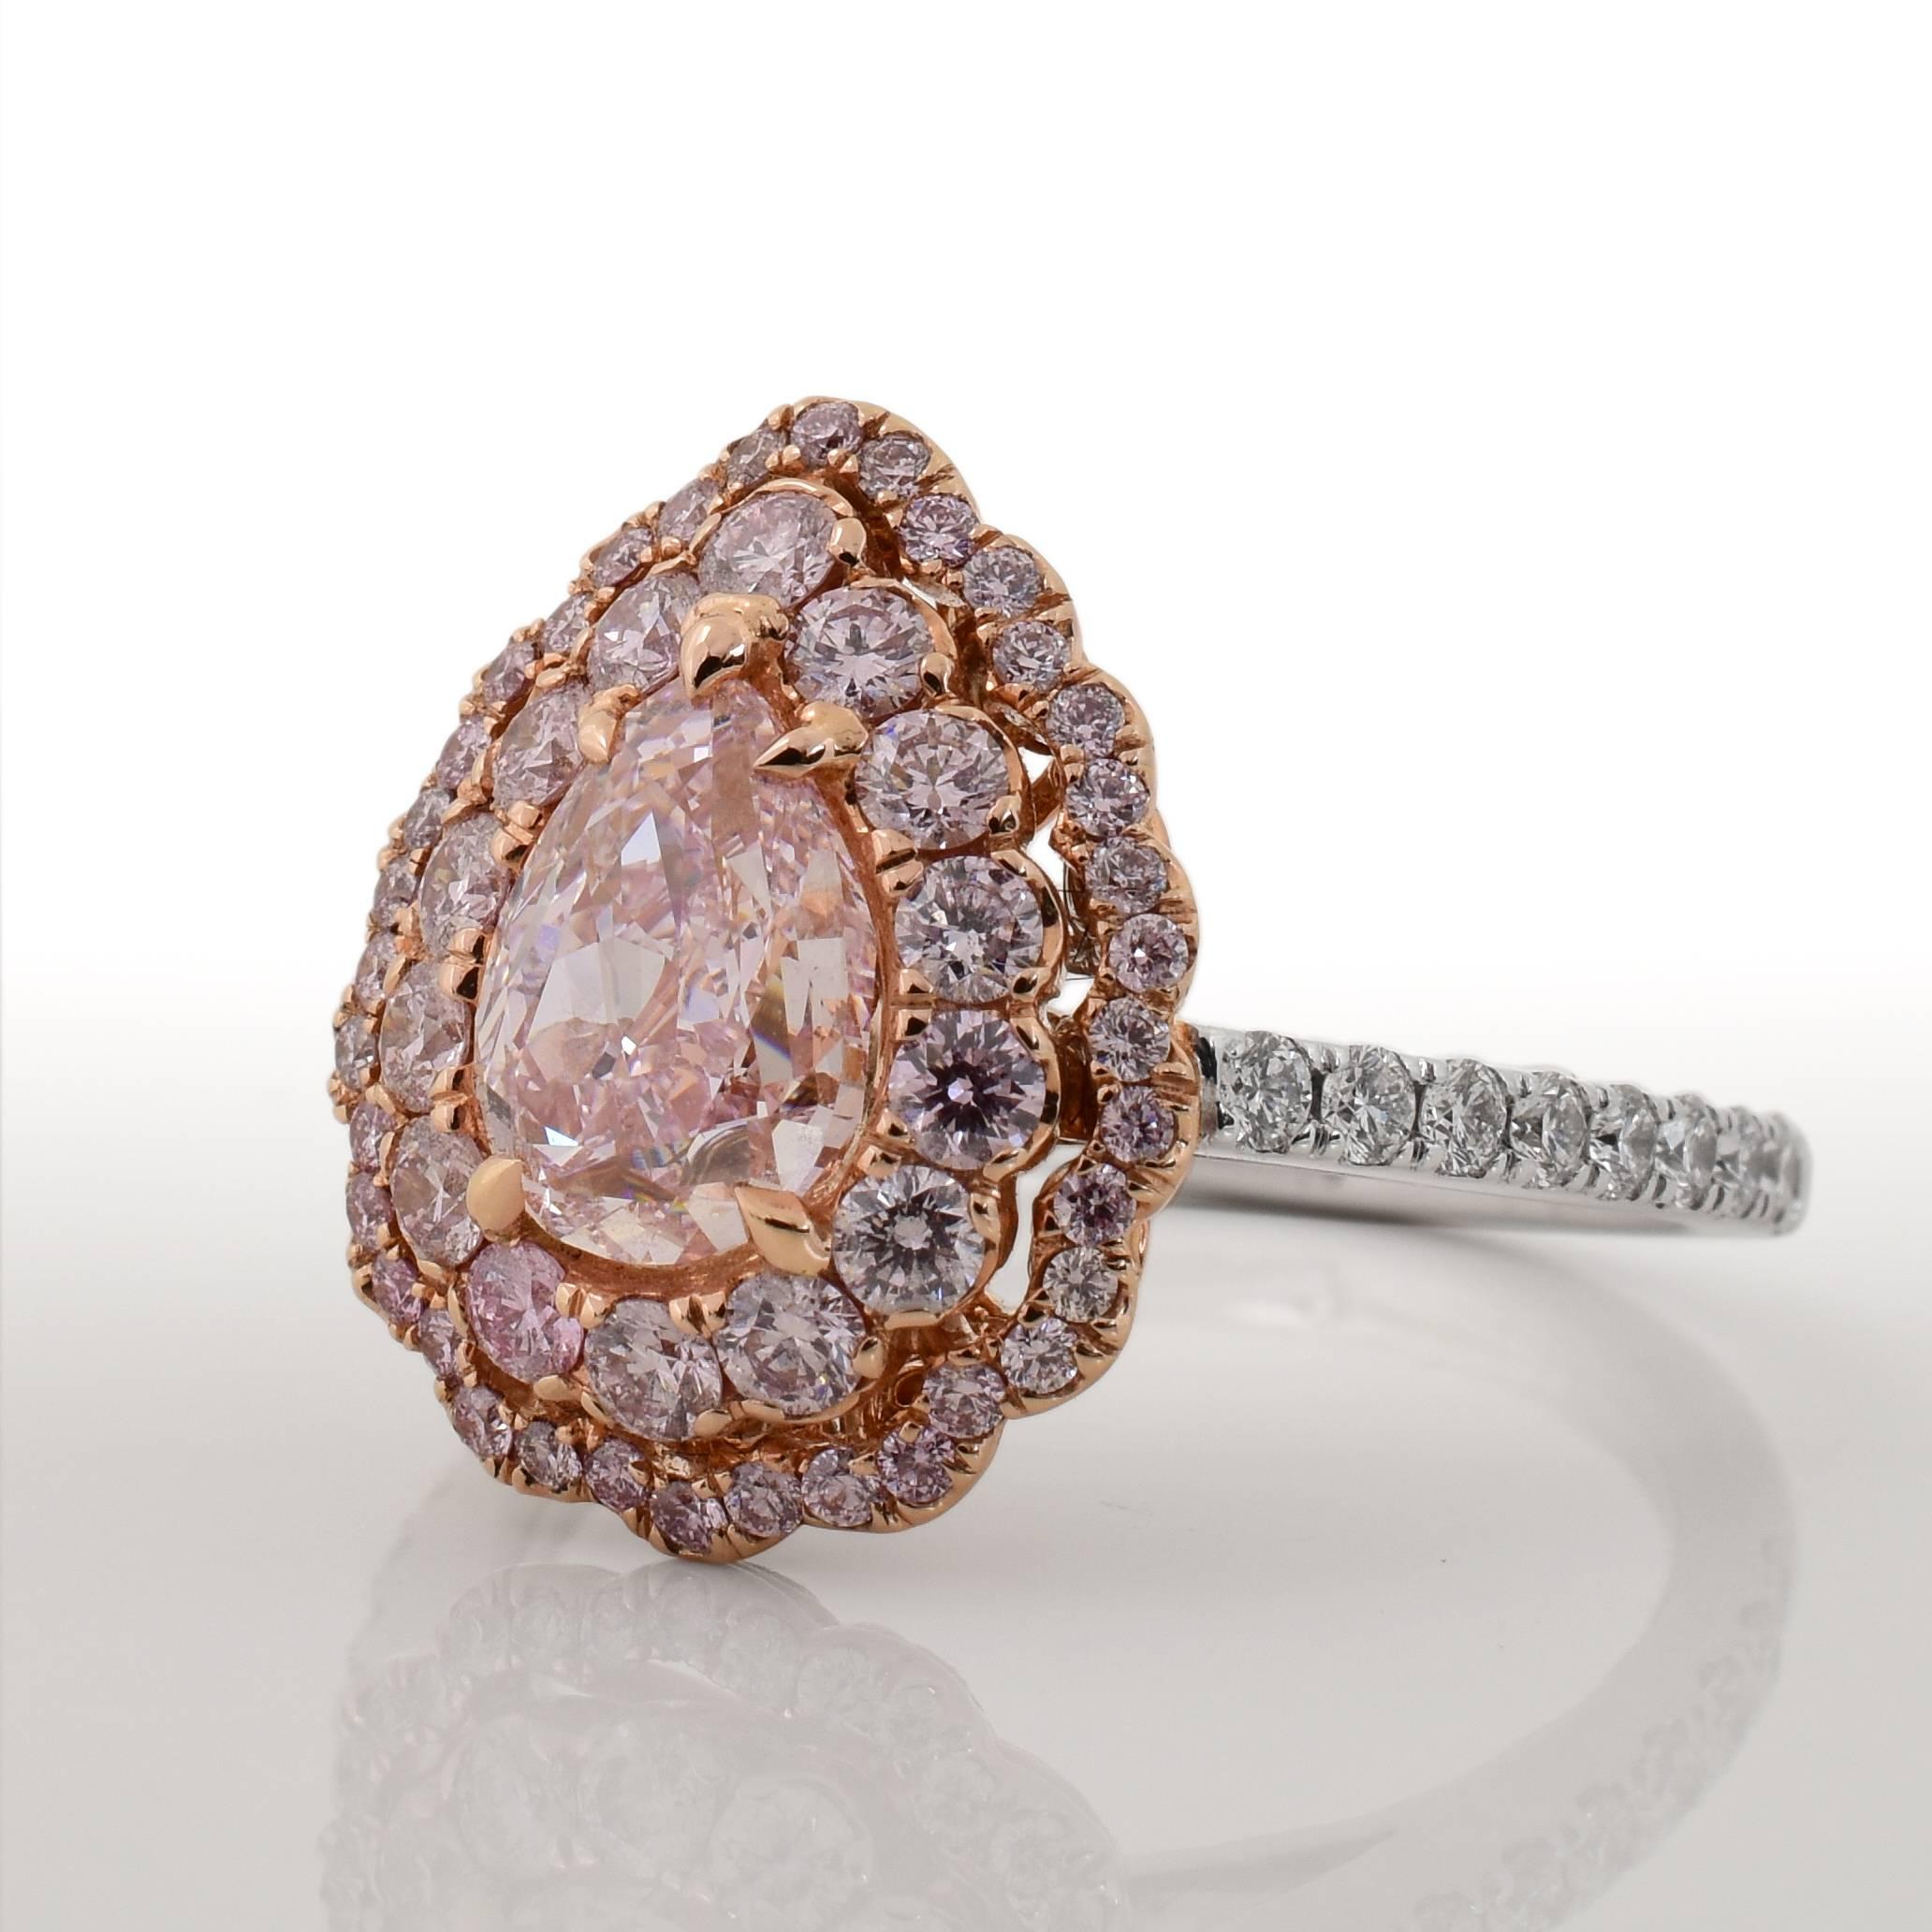 This 18k gold ring features a GIA certified 1.21 carat fancy purplish pink pear shaped diamond center stone. The stone is surrounded by two rows of pink accent diamonds, weighing 0.77 carats total. There are 0.29 carats of white diamonds adorning